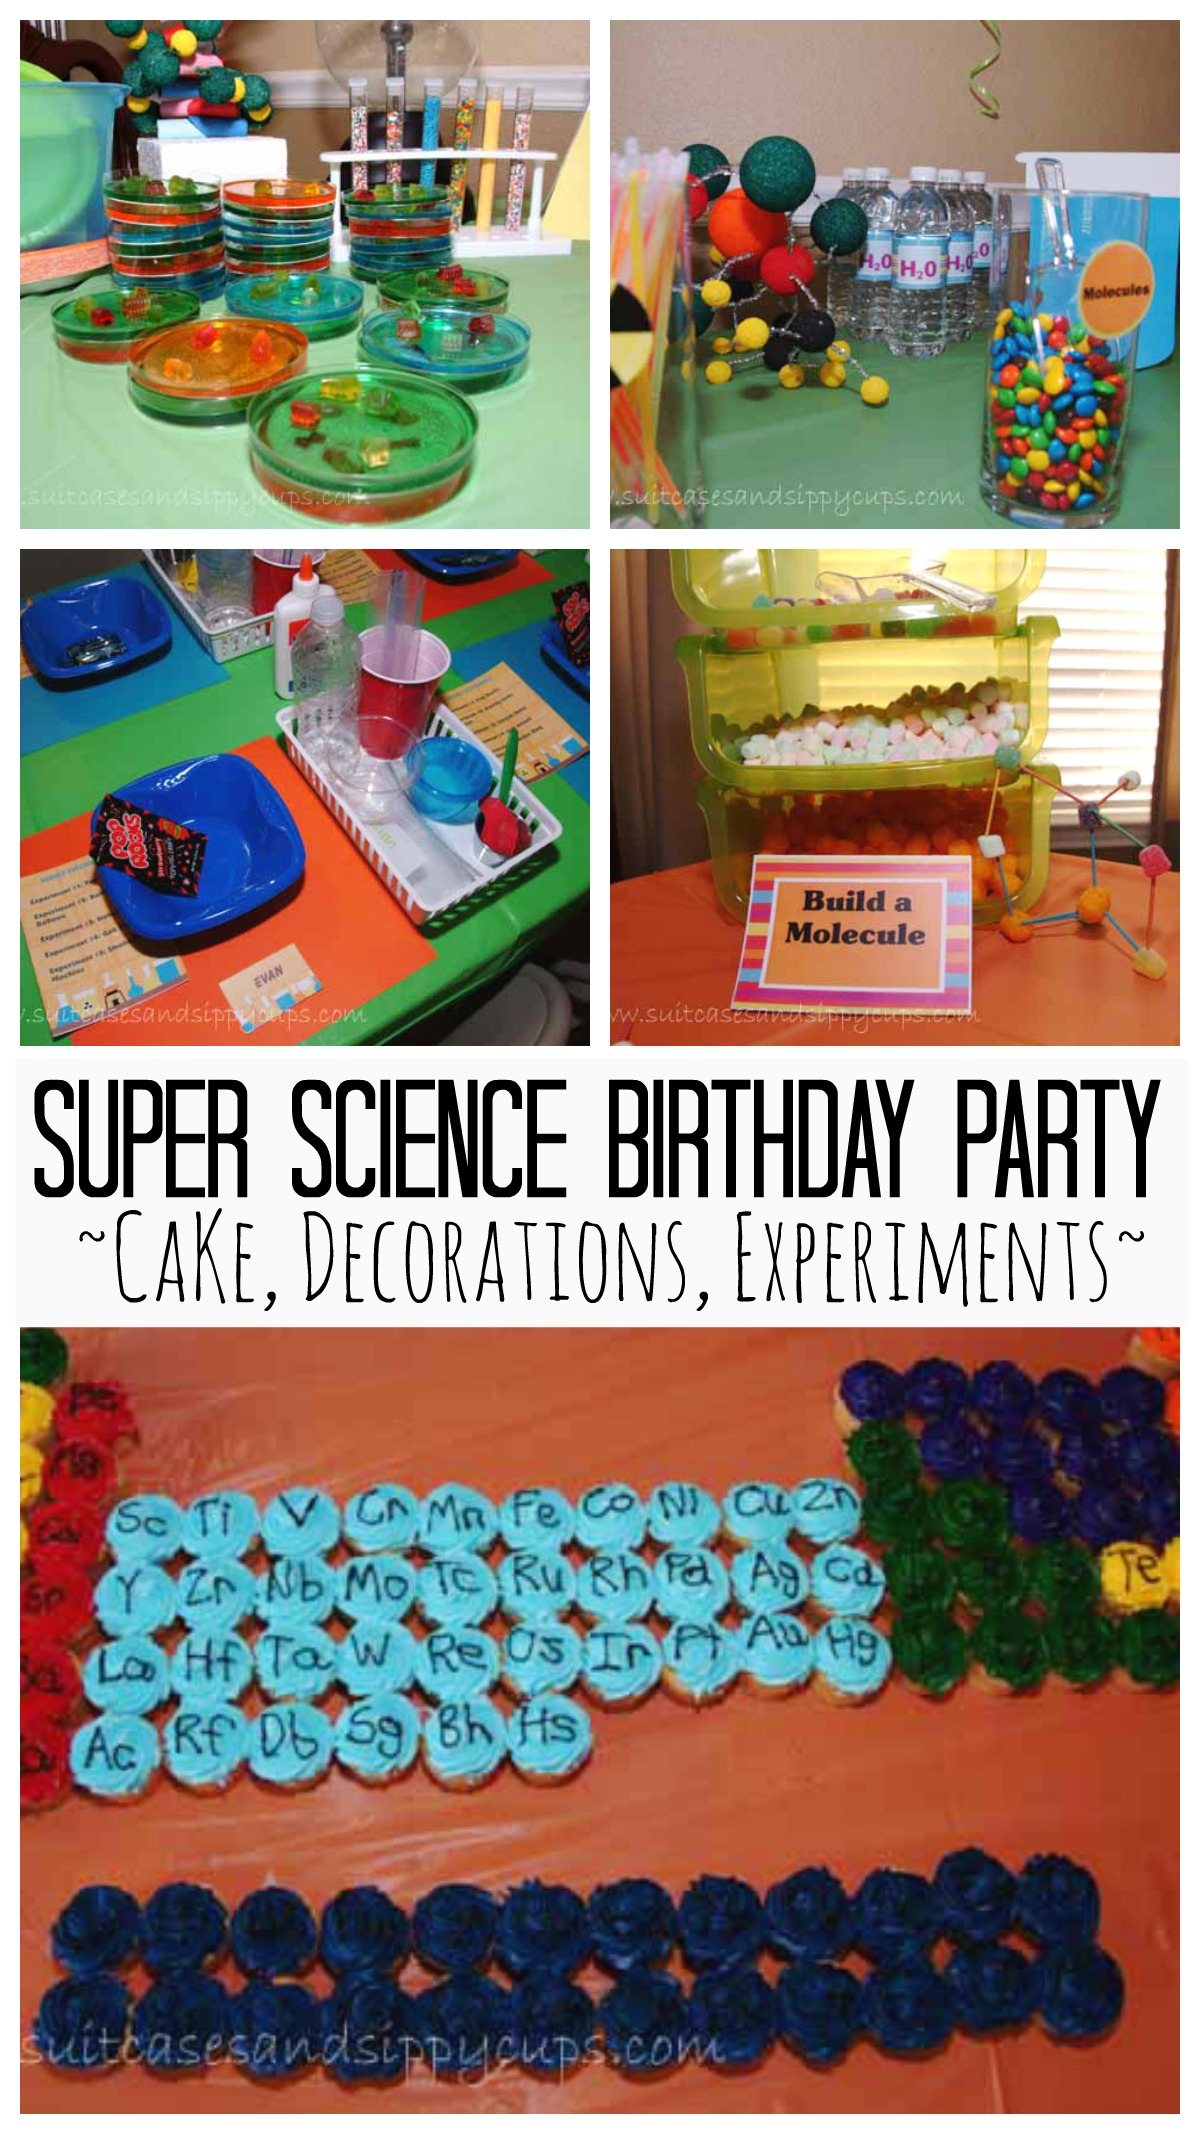 Throwing a Super Science Birthday Party